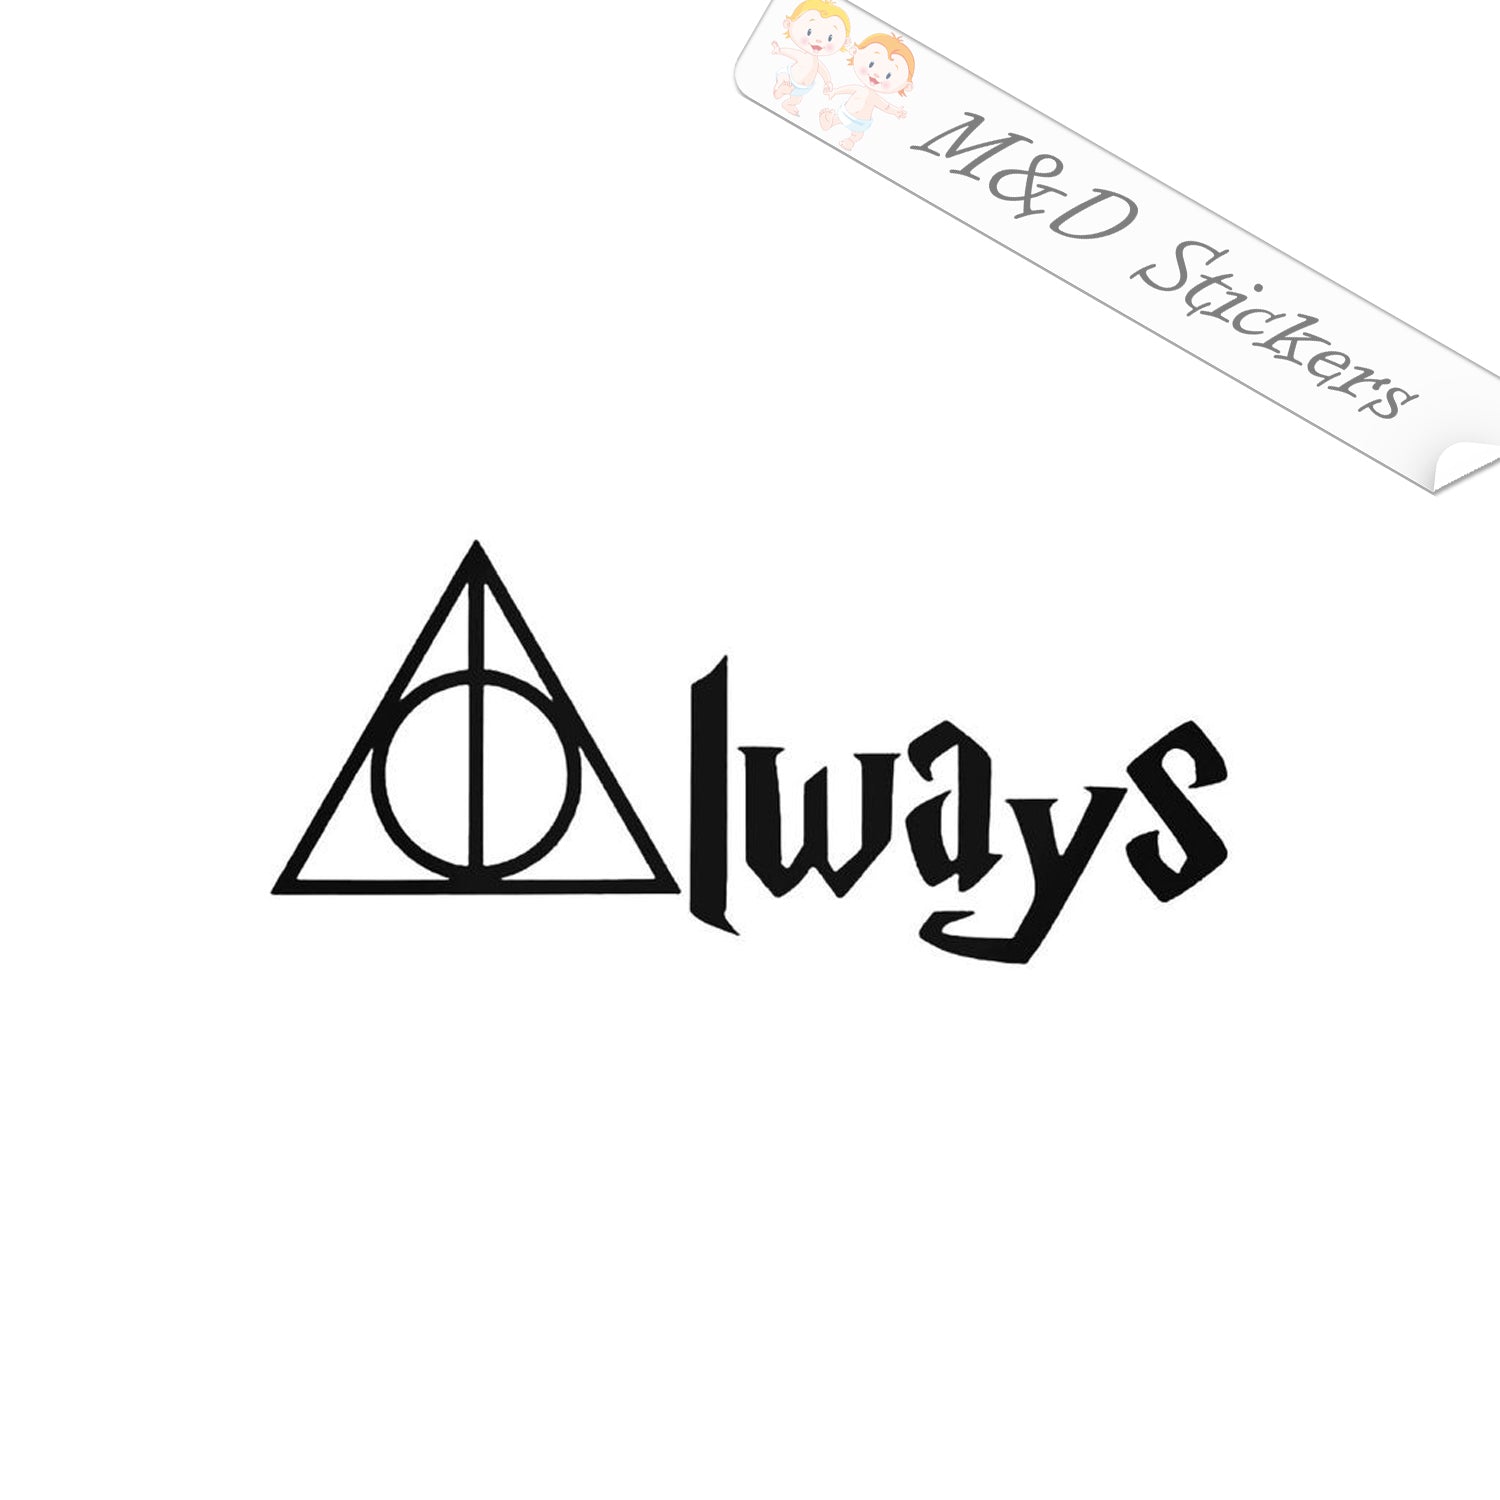 2x Always Harry Potter Vinyl Decal Sticker Different colors & size